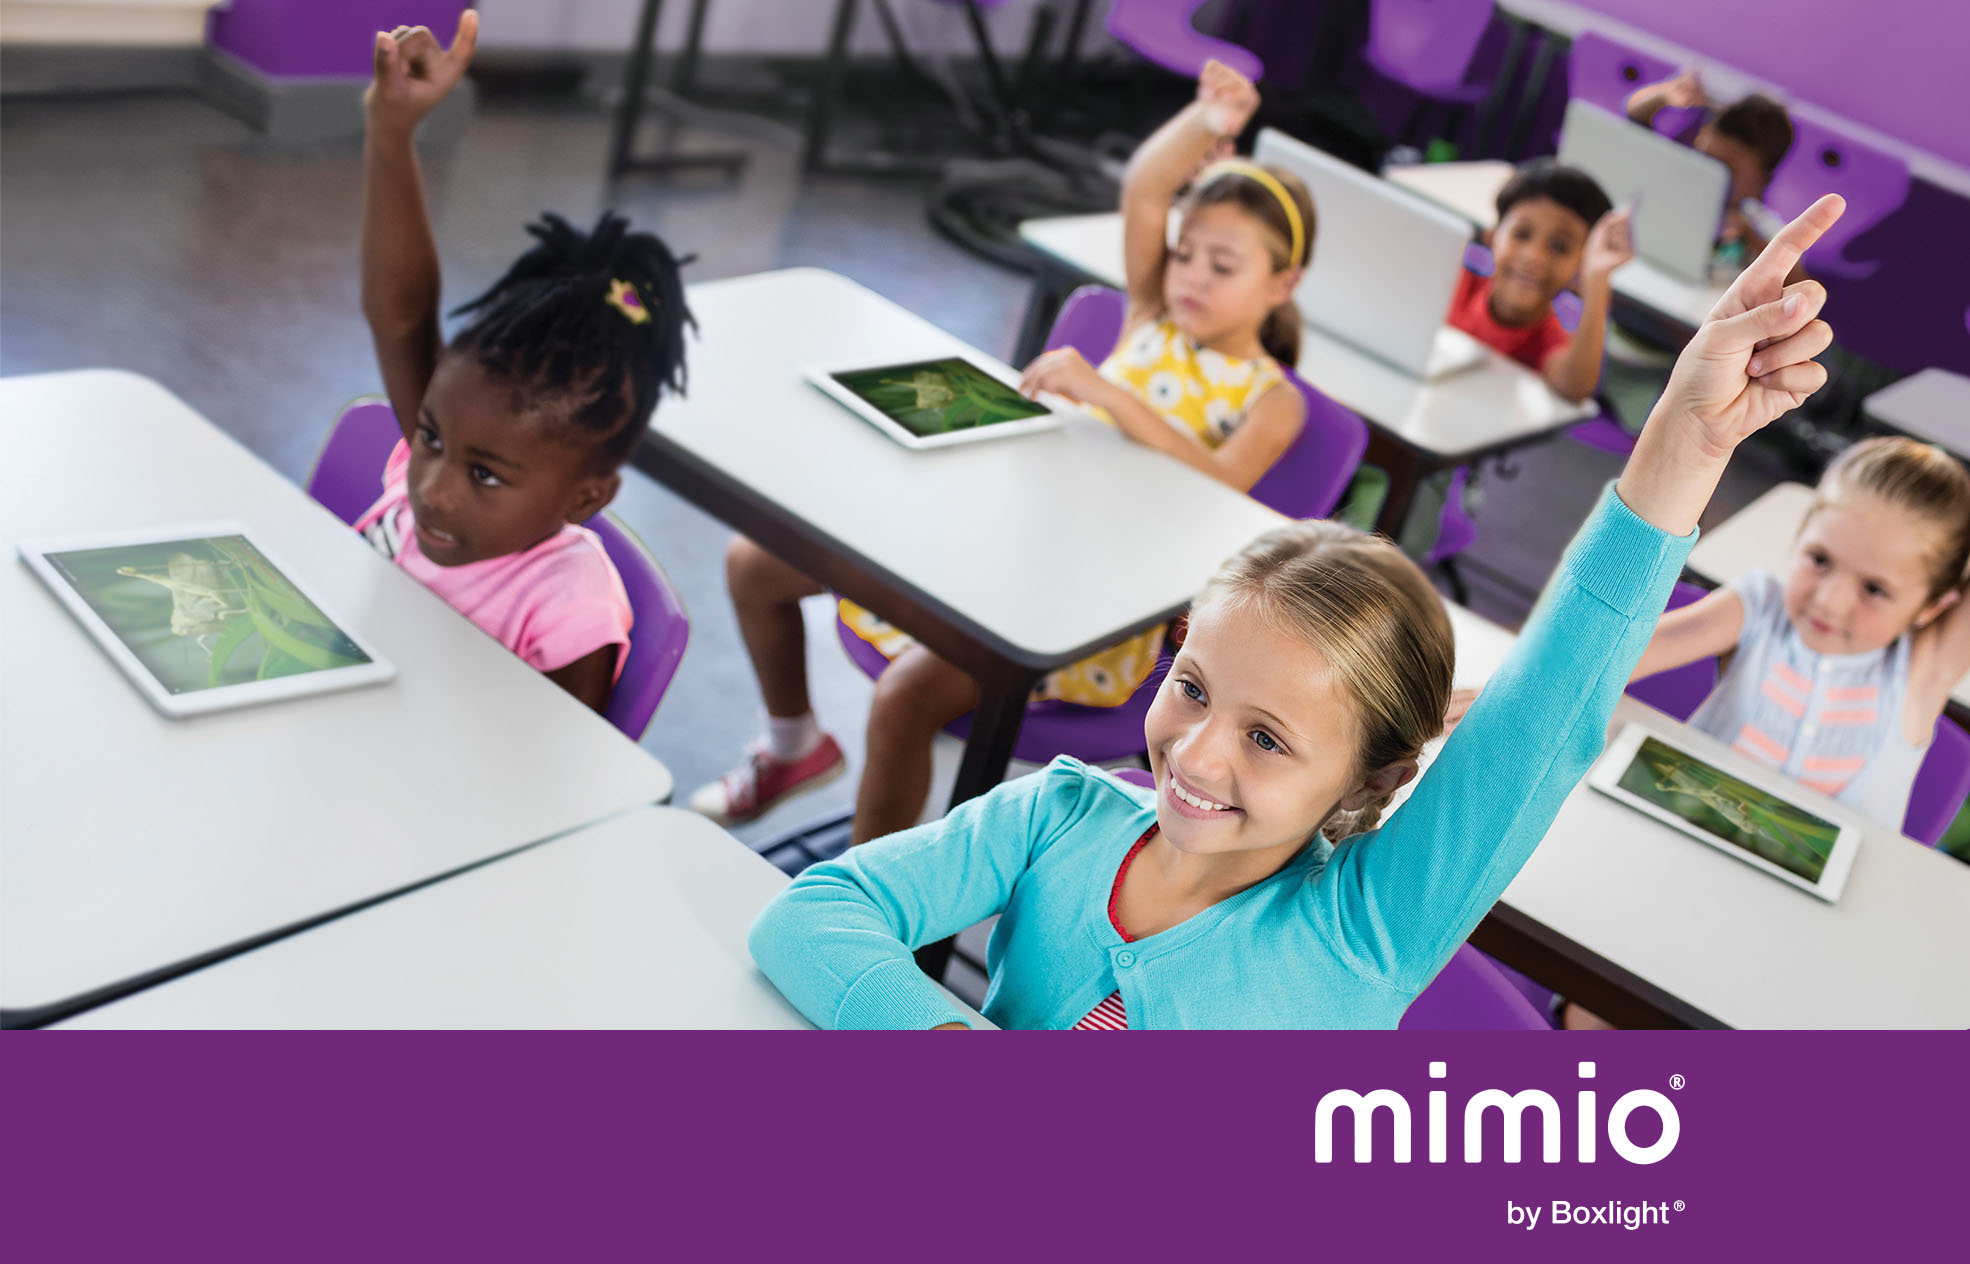 students raising their hands in class and a purple banner with the mimio logo along the bottom